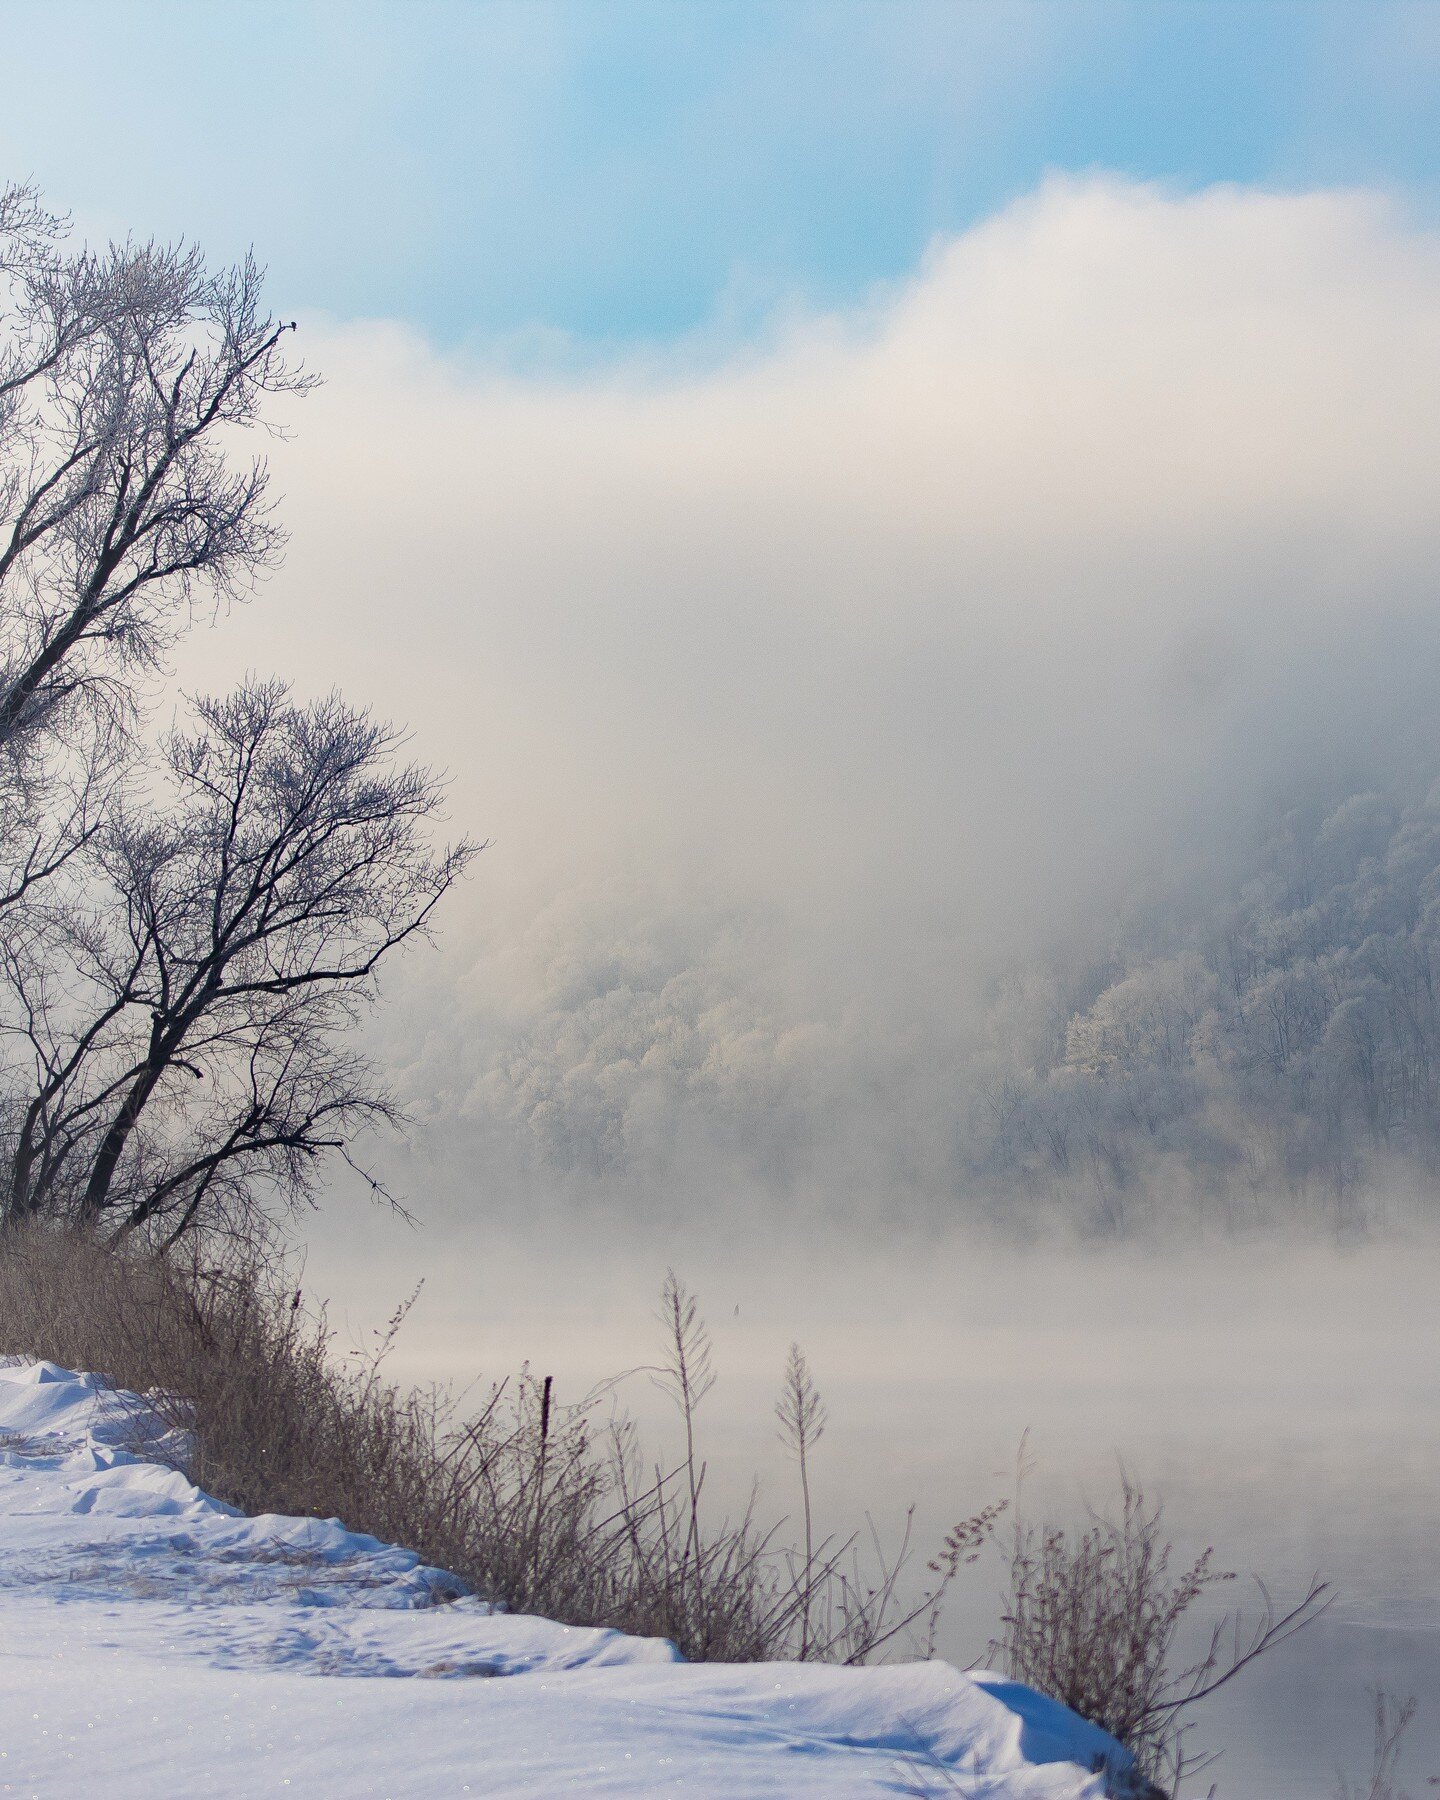 The magic of ❄ frozen fog ❄ on the river

📷 @melissaannburkhardt 
#ohioriverway #ohioriver